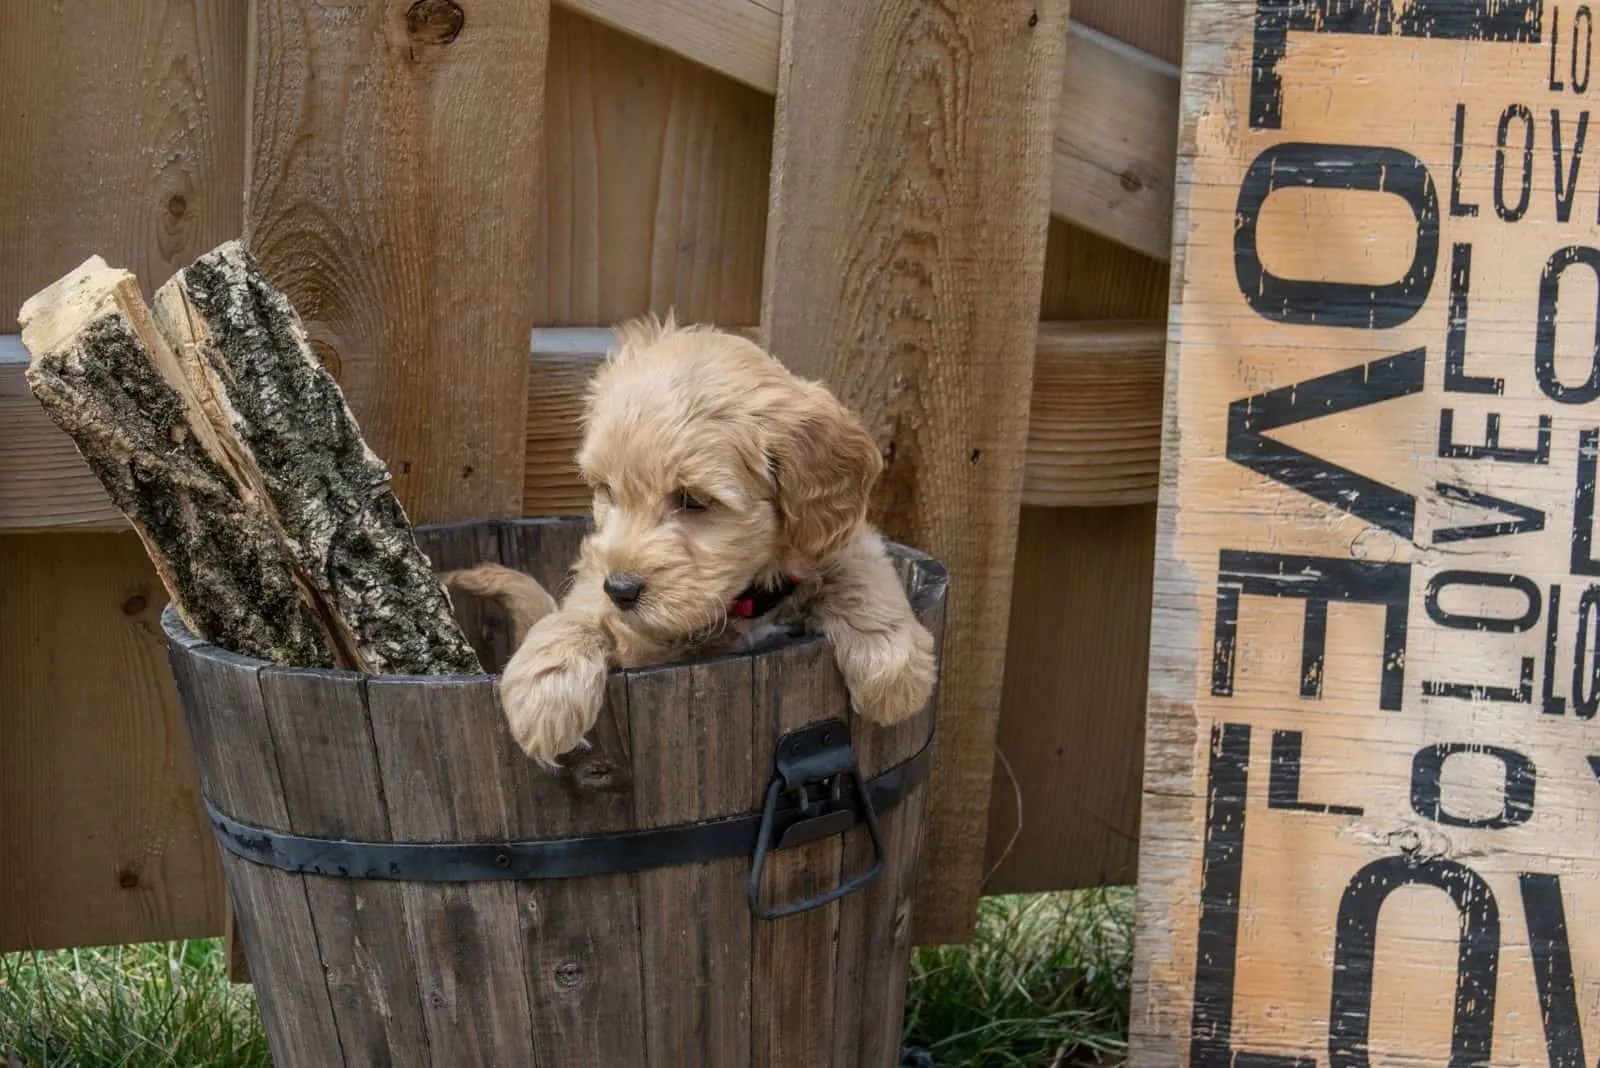 mini goldendoodle puppy inside the wooden container outdoors